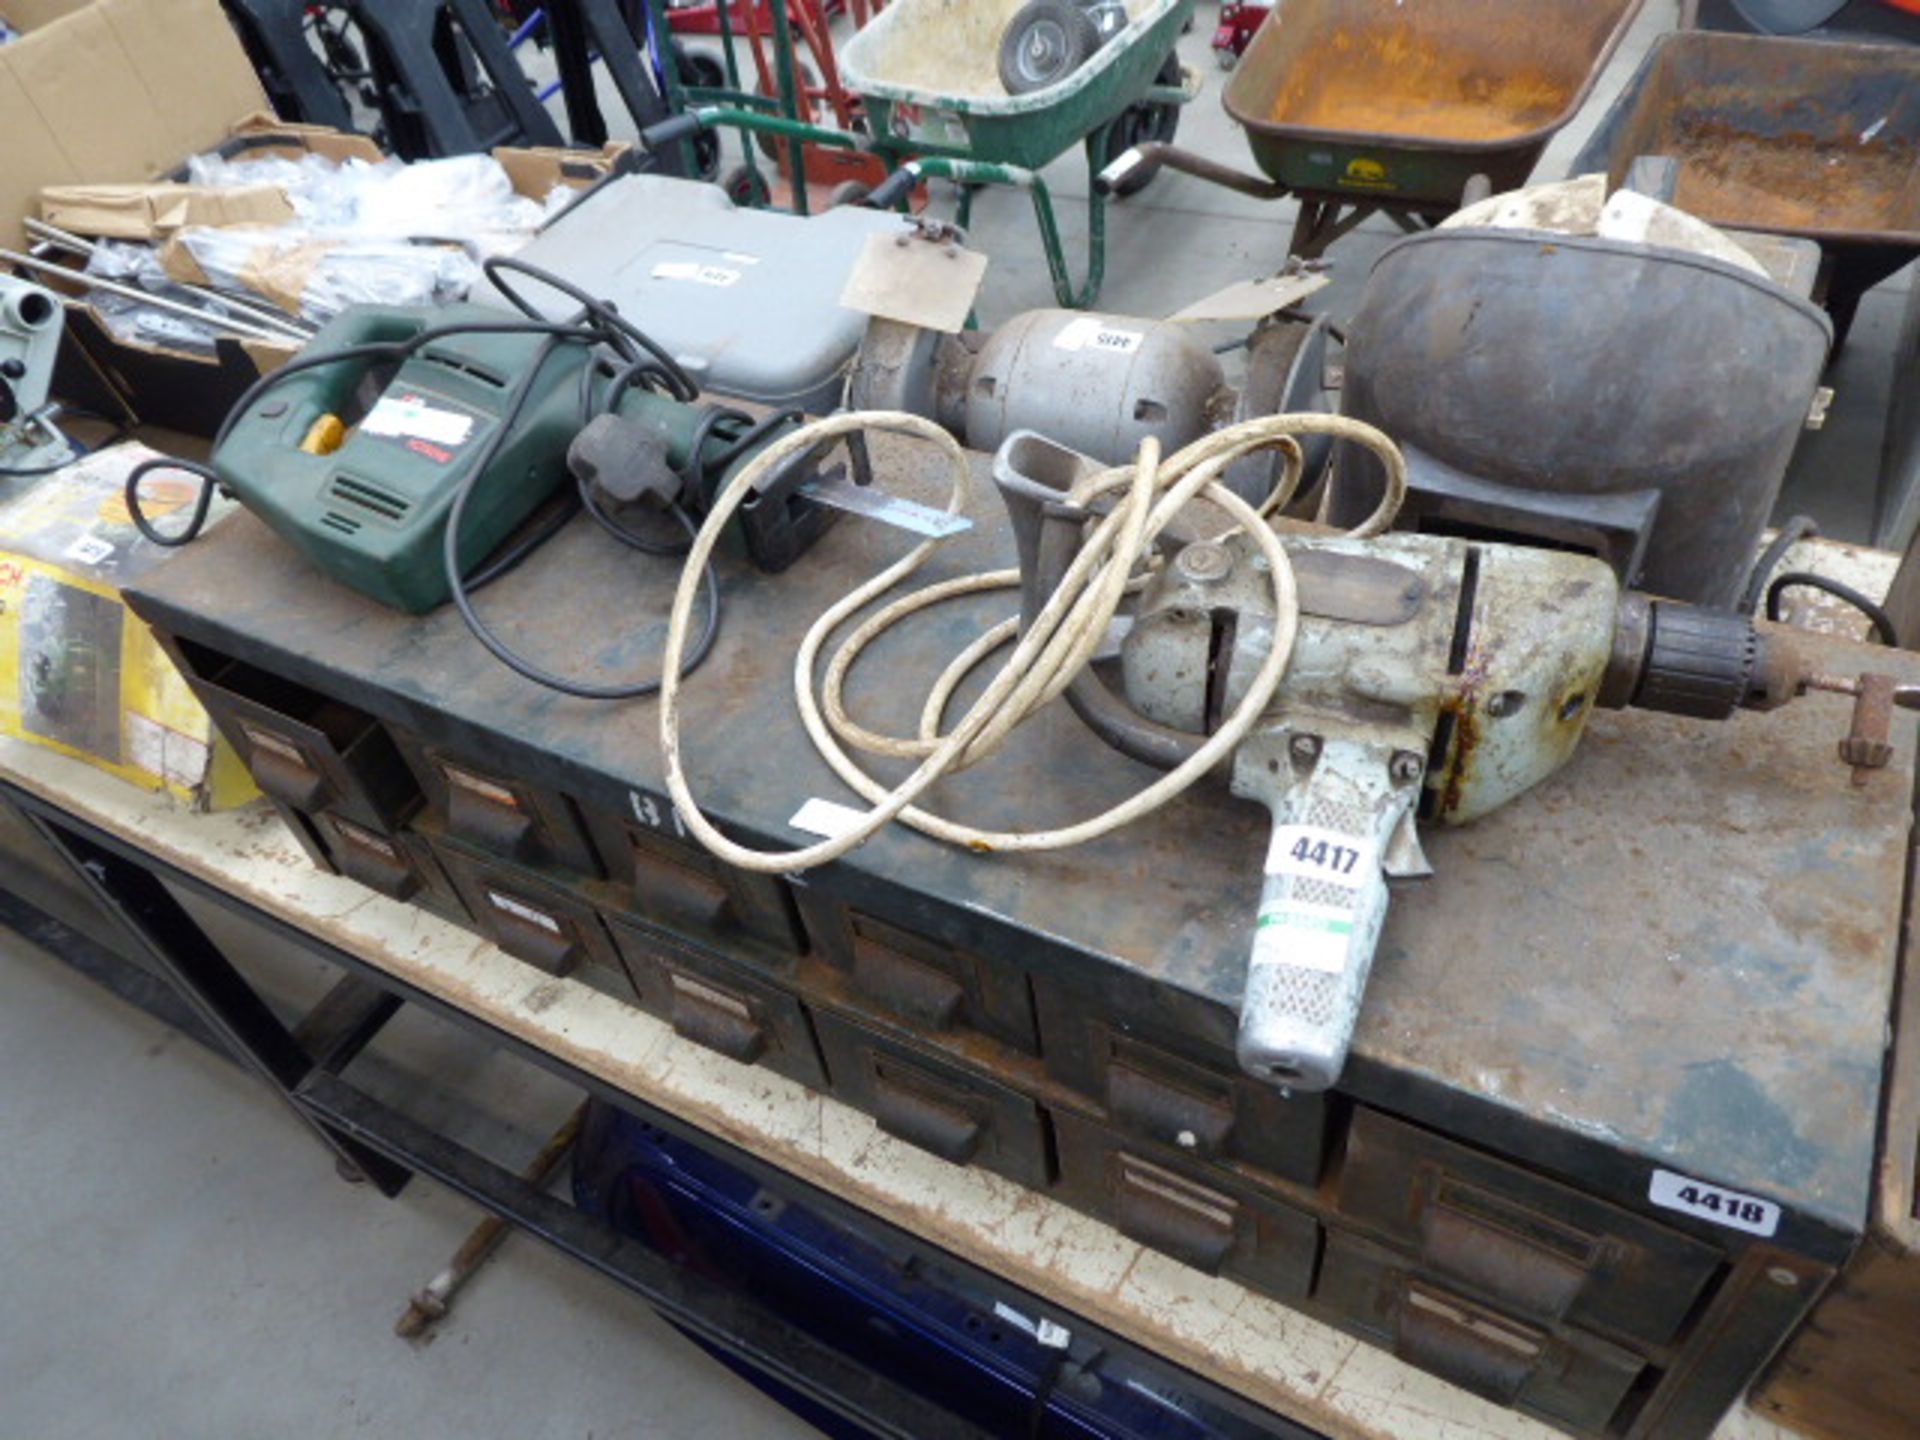 Boxed reciprocating saw and a large vintage drill